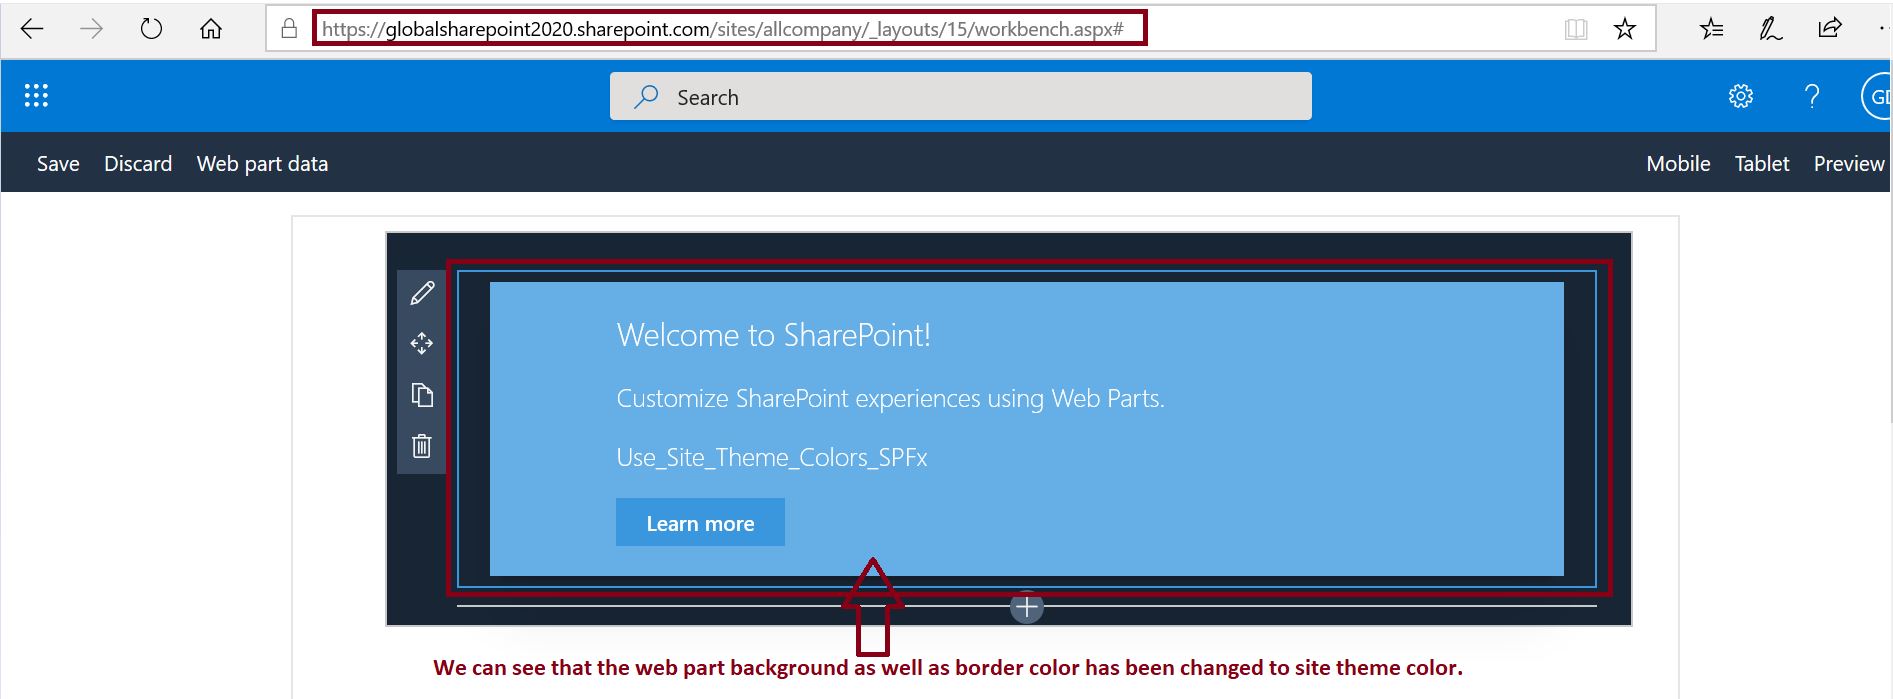 Verification - web part background color has been changed to site theme color in SPFx